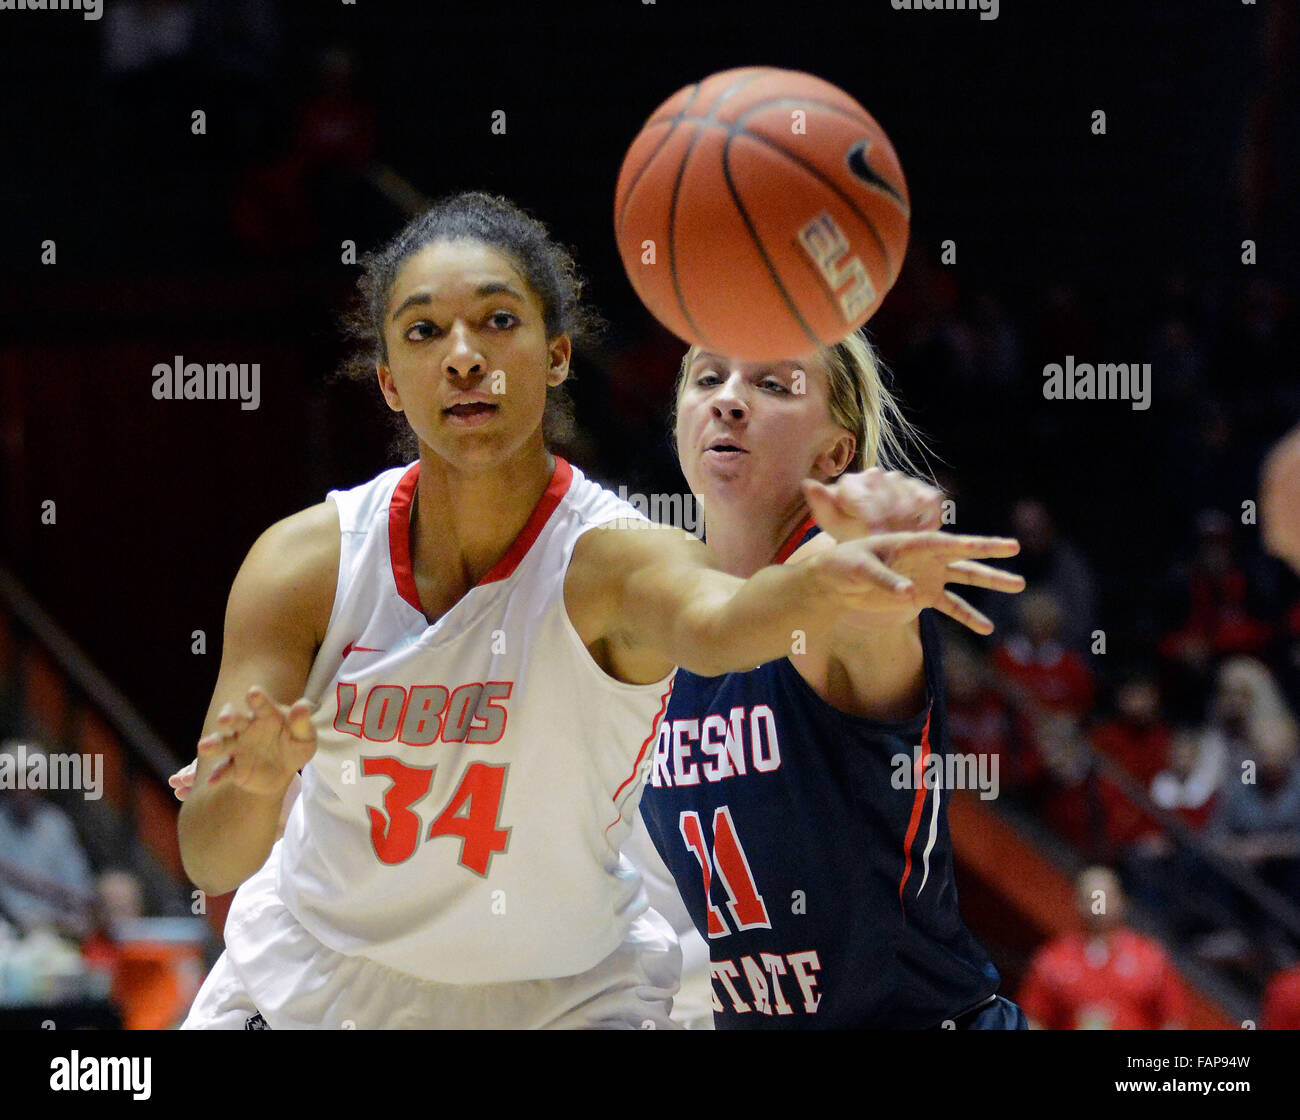 Albuquerque, NM, USA. 2nd Jan, 2016. UNM's # 34 Whitney Johnson passes off the ball while being guarded by Fresno's # 11 Alex Furr in their game Saturday in the Pit. Saturday, Jan. 02, 2016. © Jim Thompson/Albuquerque Journal/ZUMA Wire/Alamy Live News Stock Photo